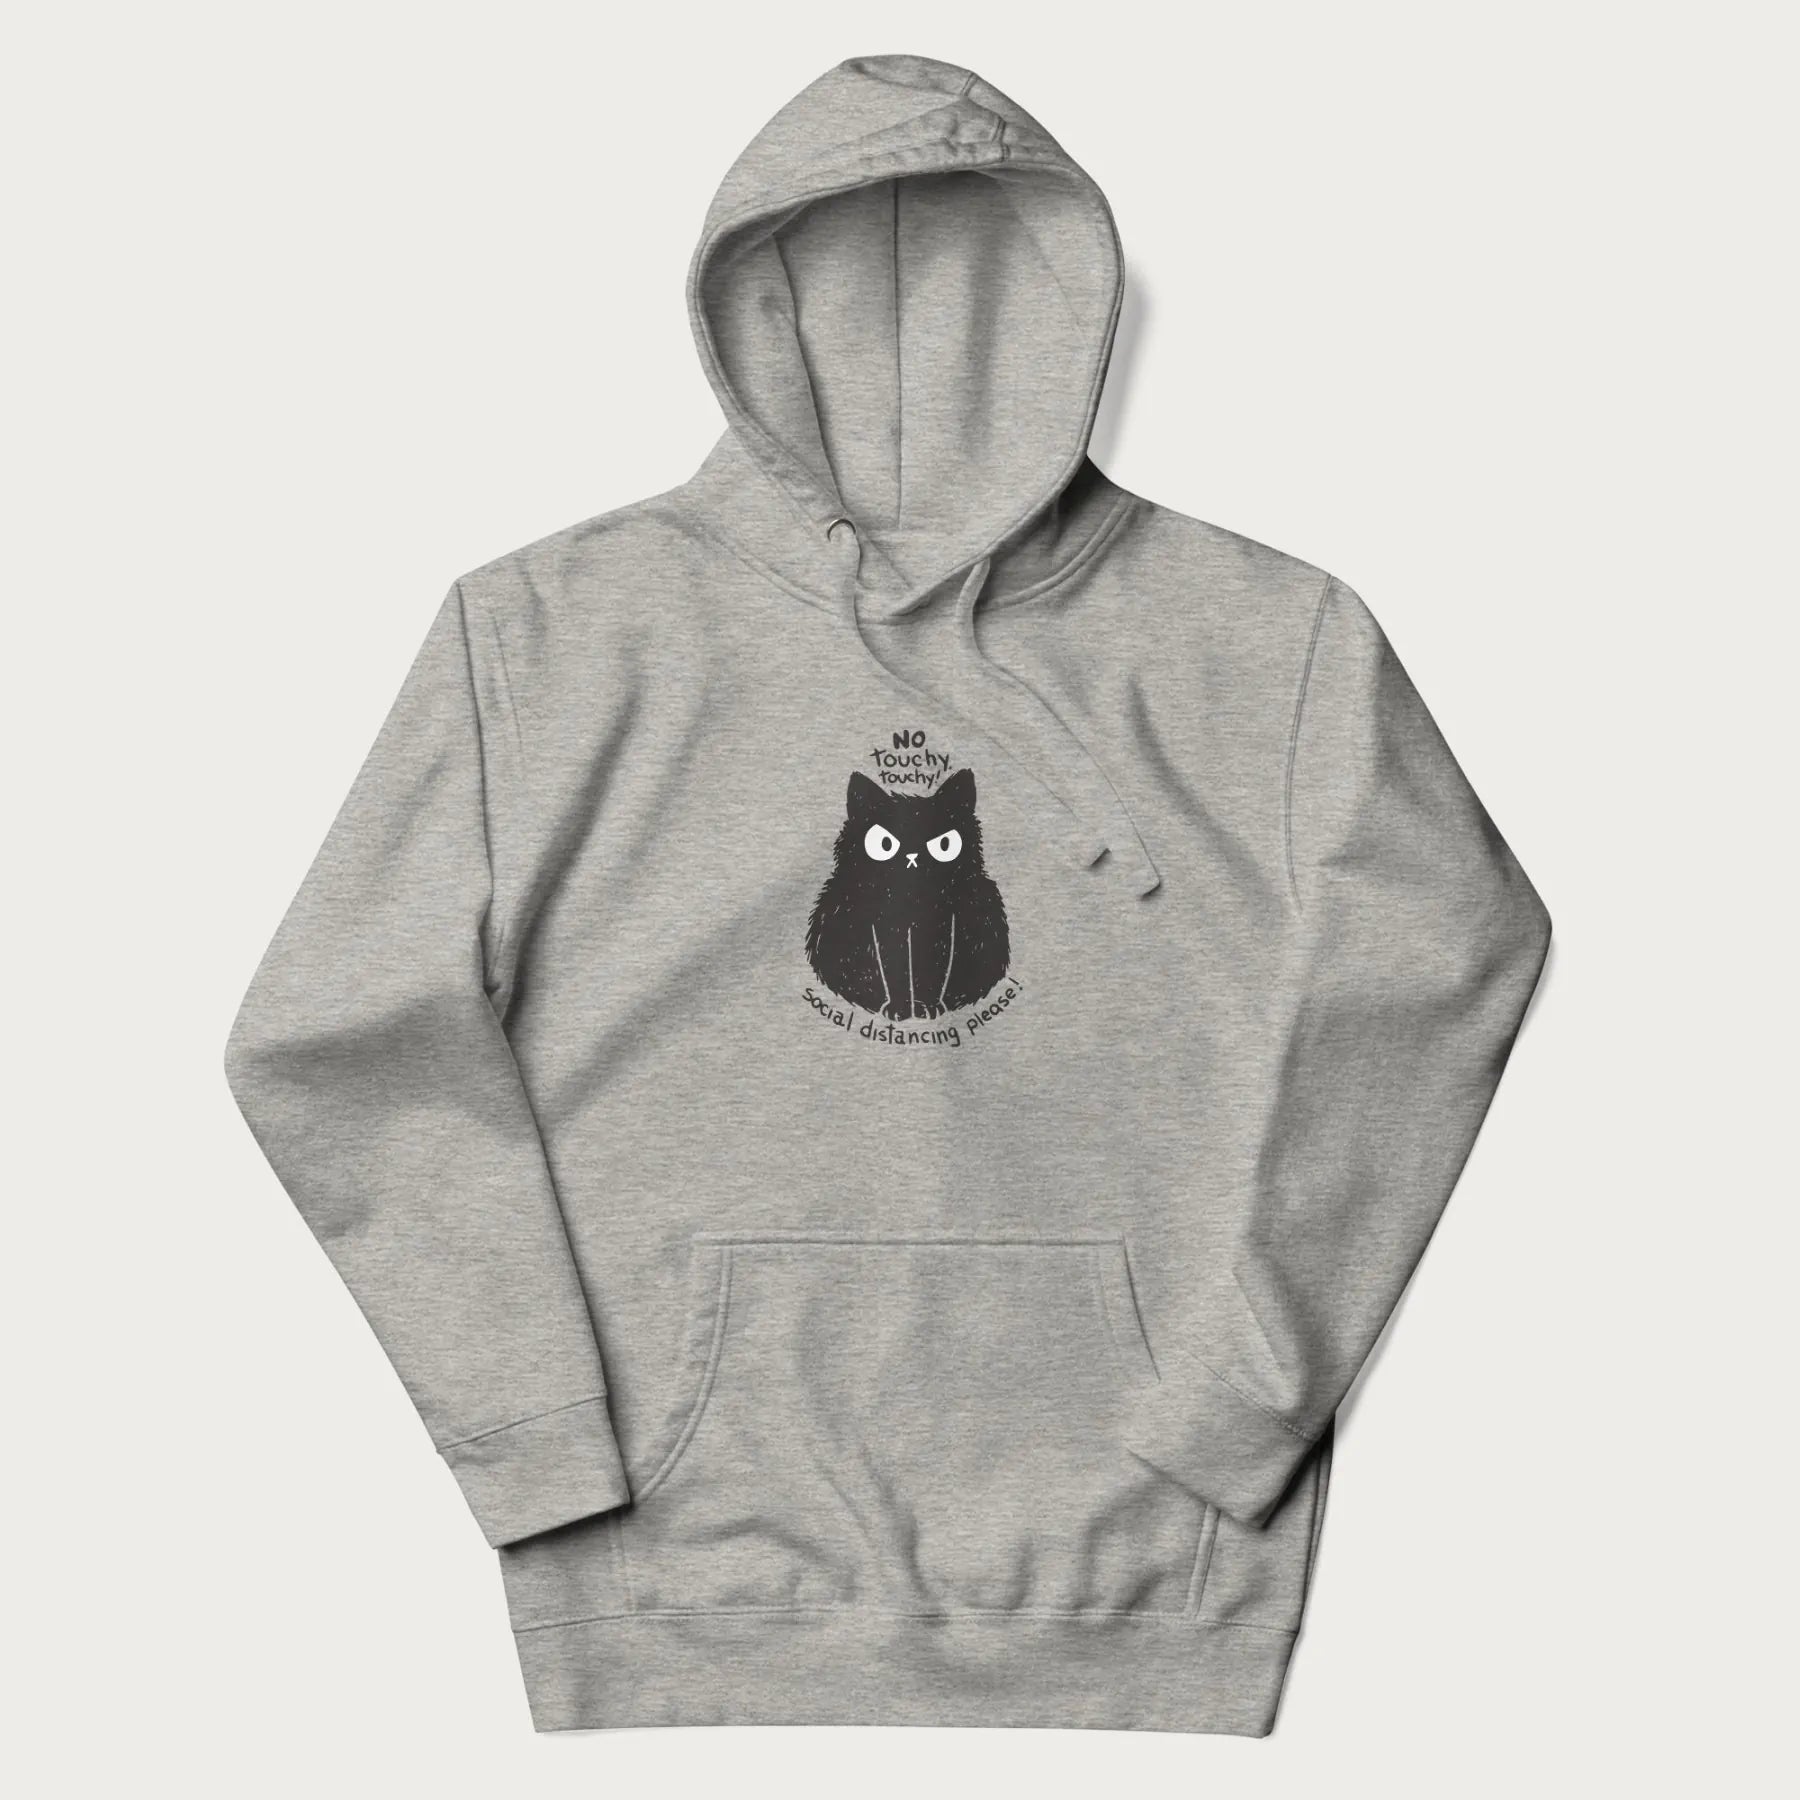 Light grey hoodie with a 'No Touchy, Touchy! Social Distancing Please!' black cat graphic design.